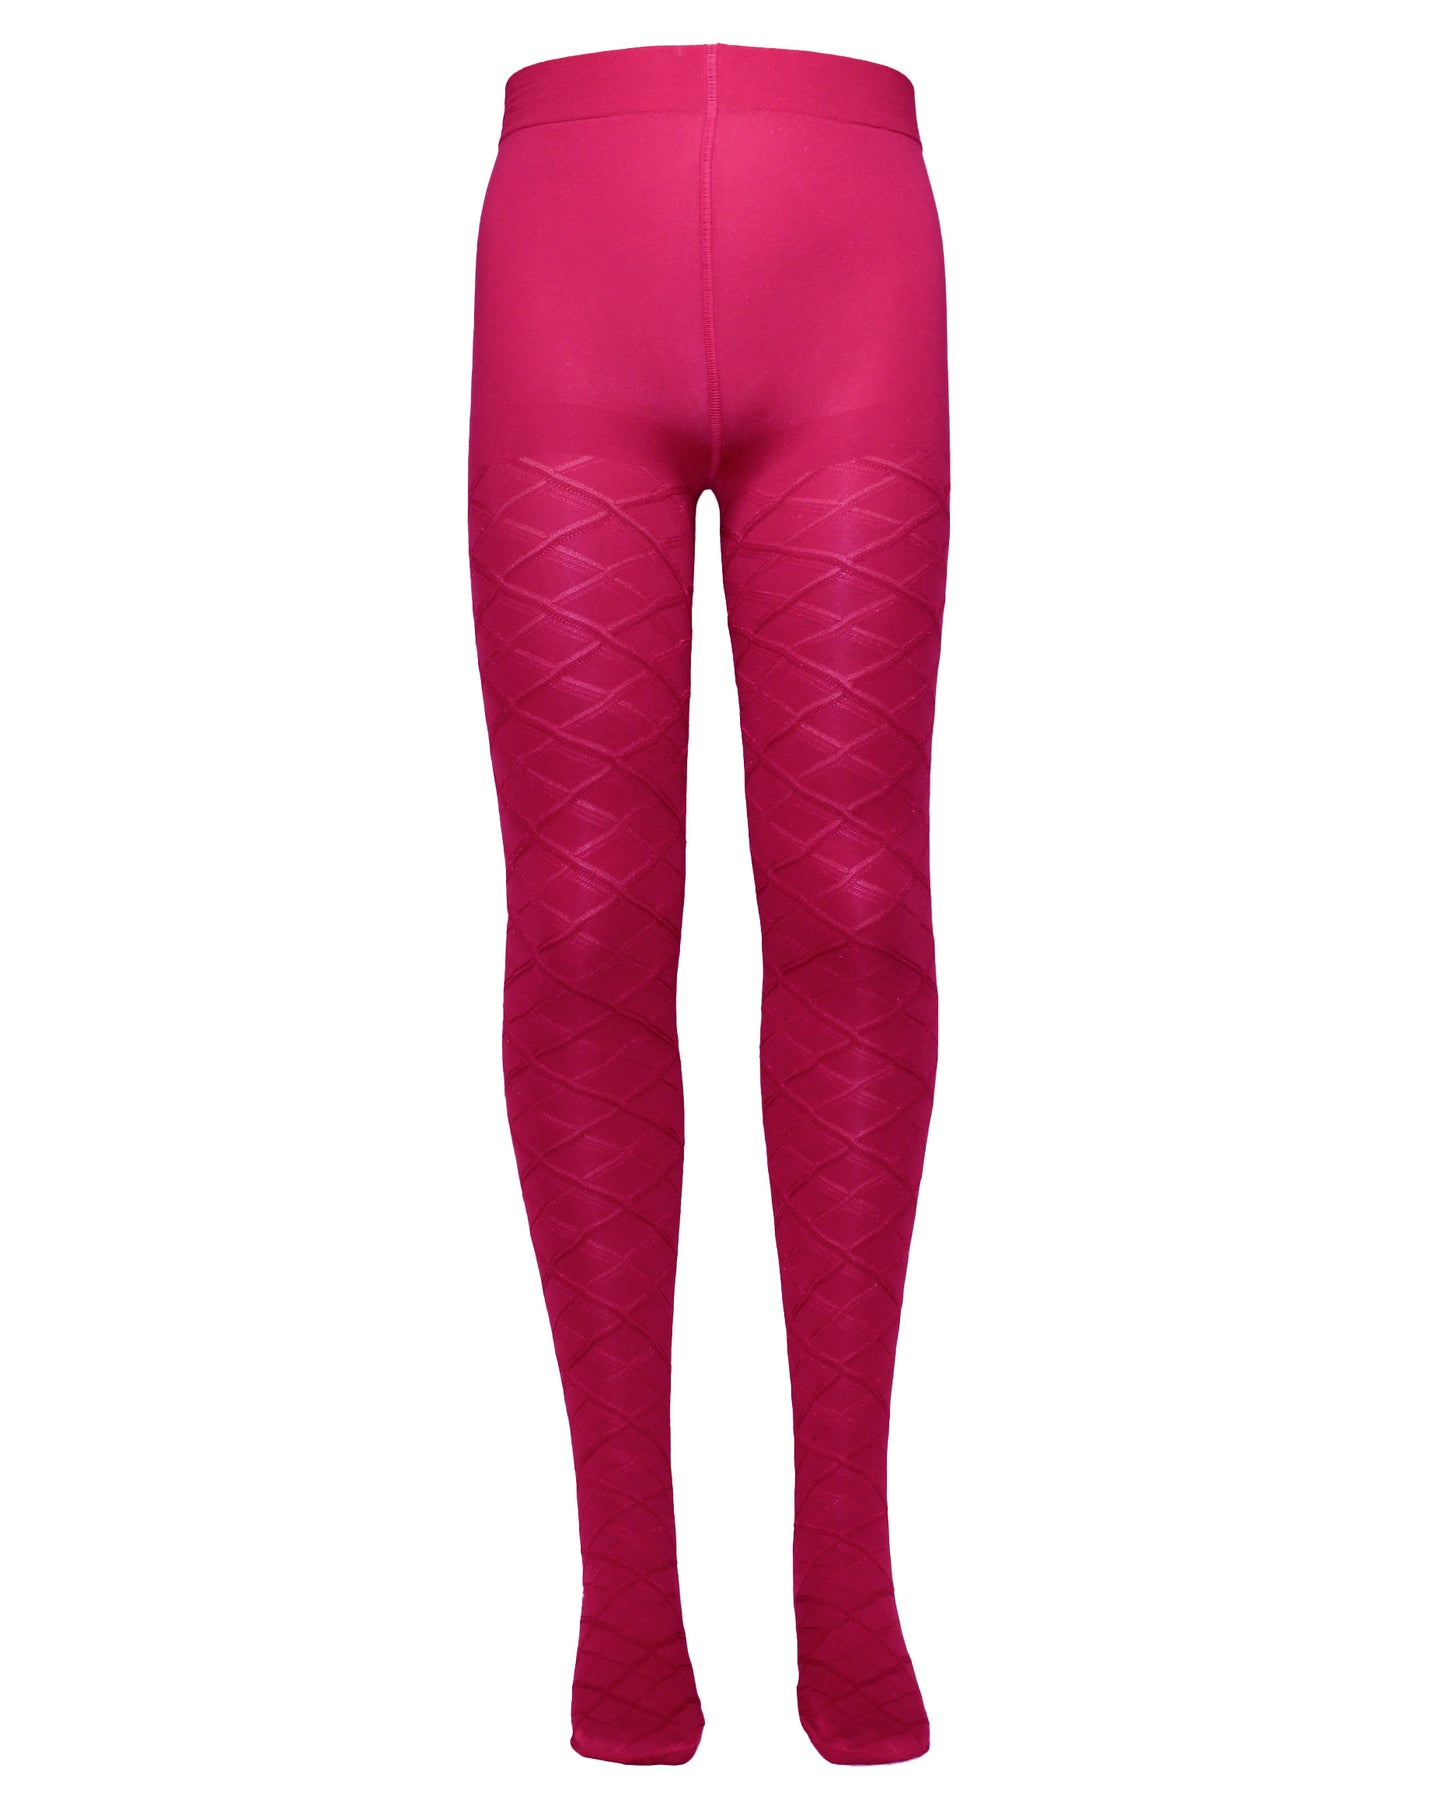 Omsa Serenella Lily Collant - Bright pink (fuxia) opaque children's tights with a woven glossy diamond shape pattern, plain top and deep comfort waist band.